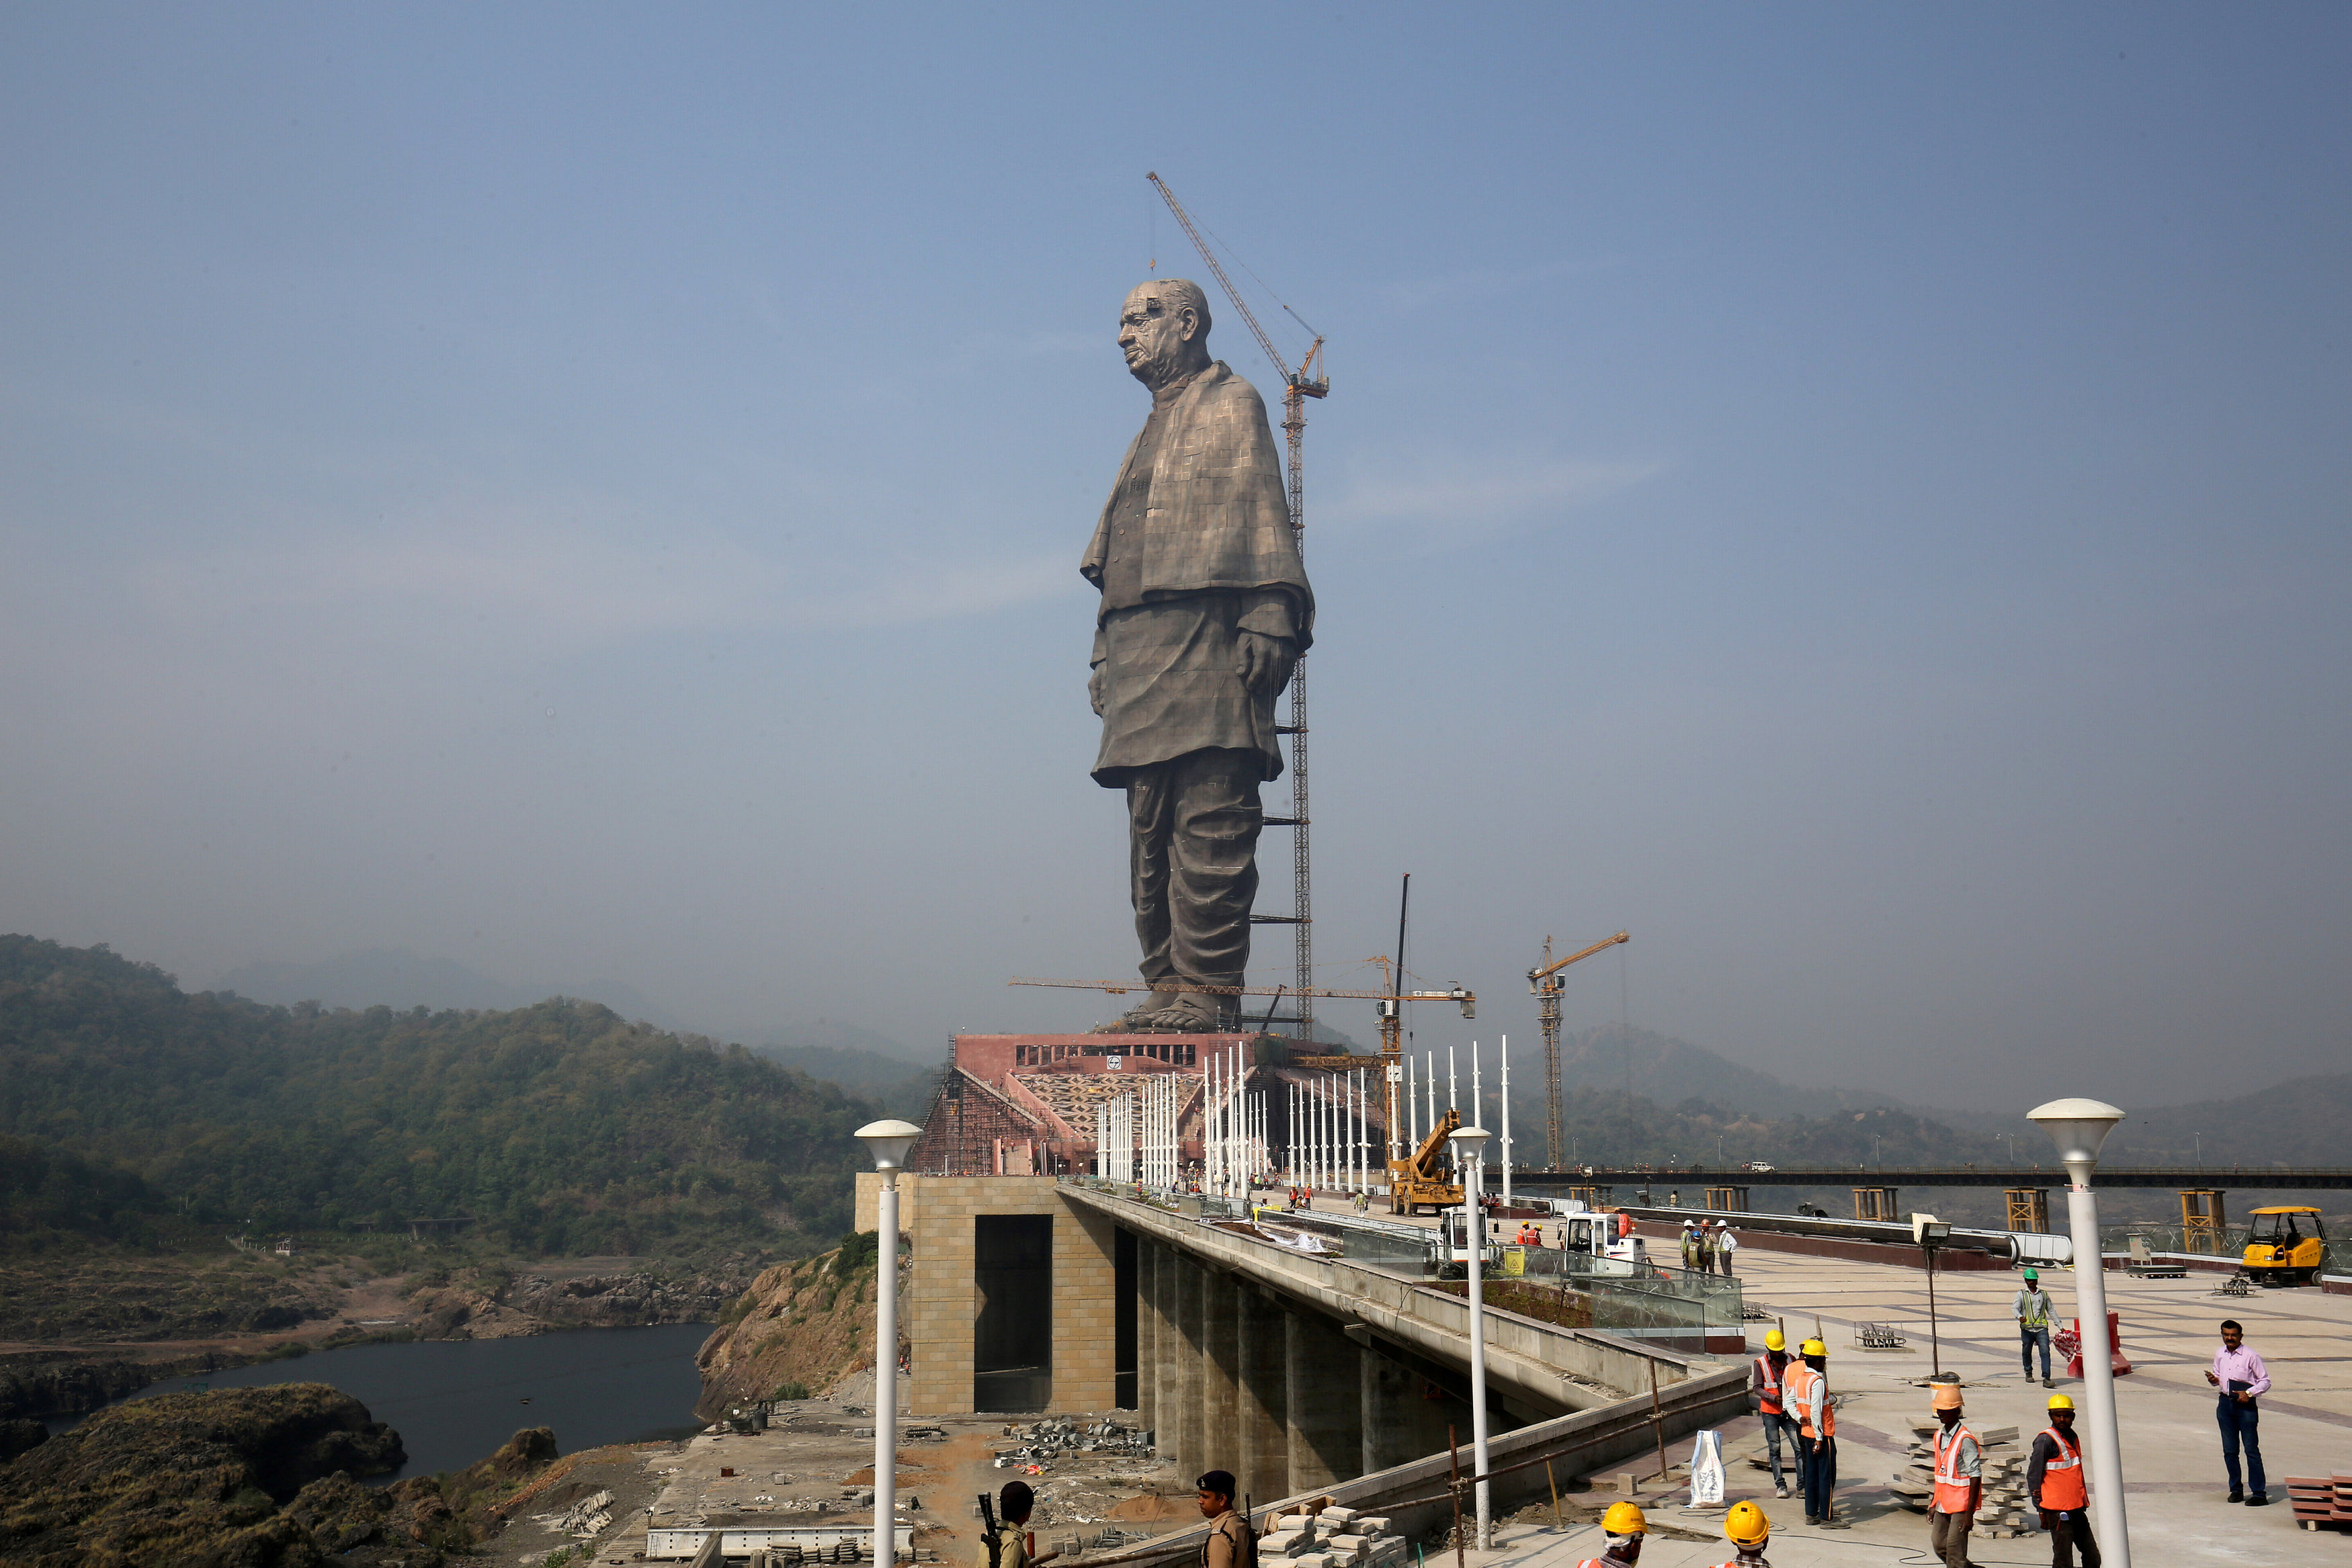 Labourers work at the under construction site of the "Statue of Unity" portraying Sardar Vallabhbhai Patel, in Kavadia, Gujarat. (Reuters)